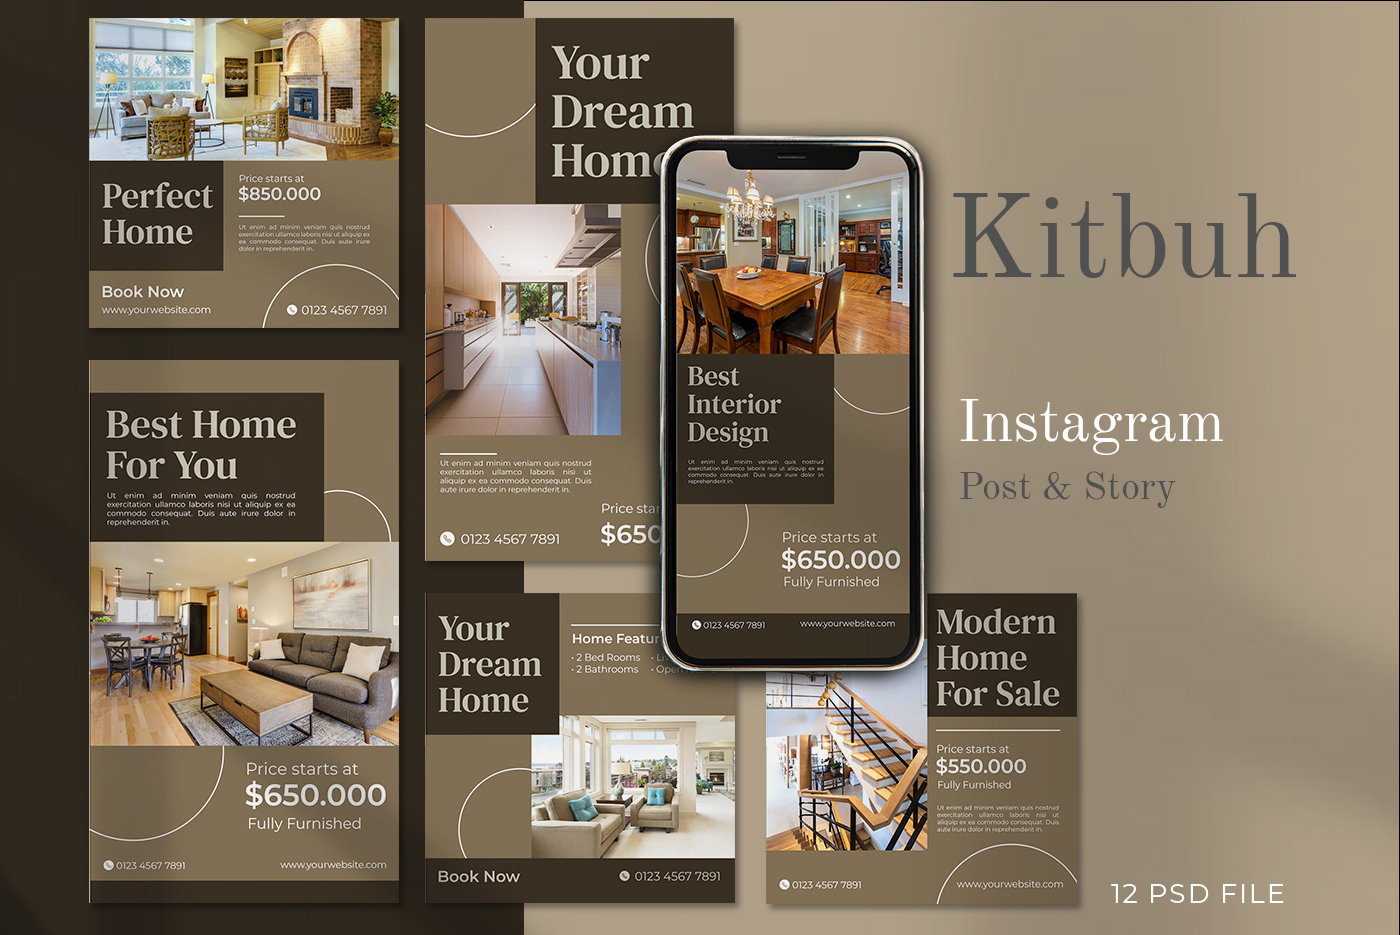 Kitbuh - Instagram Stories and Post for Home Furniture Social Media